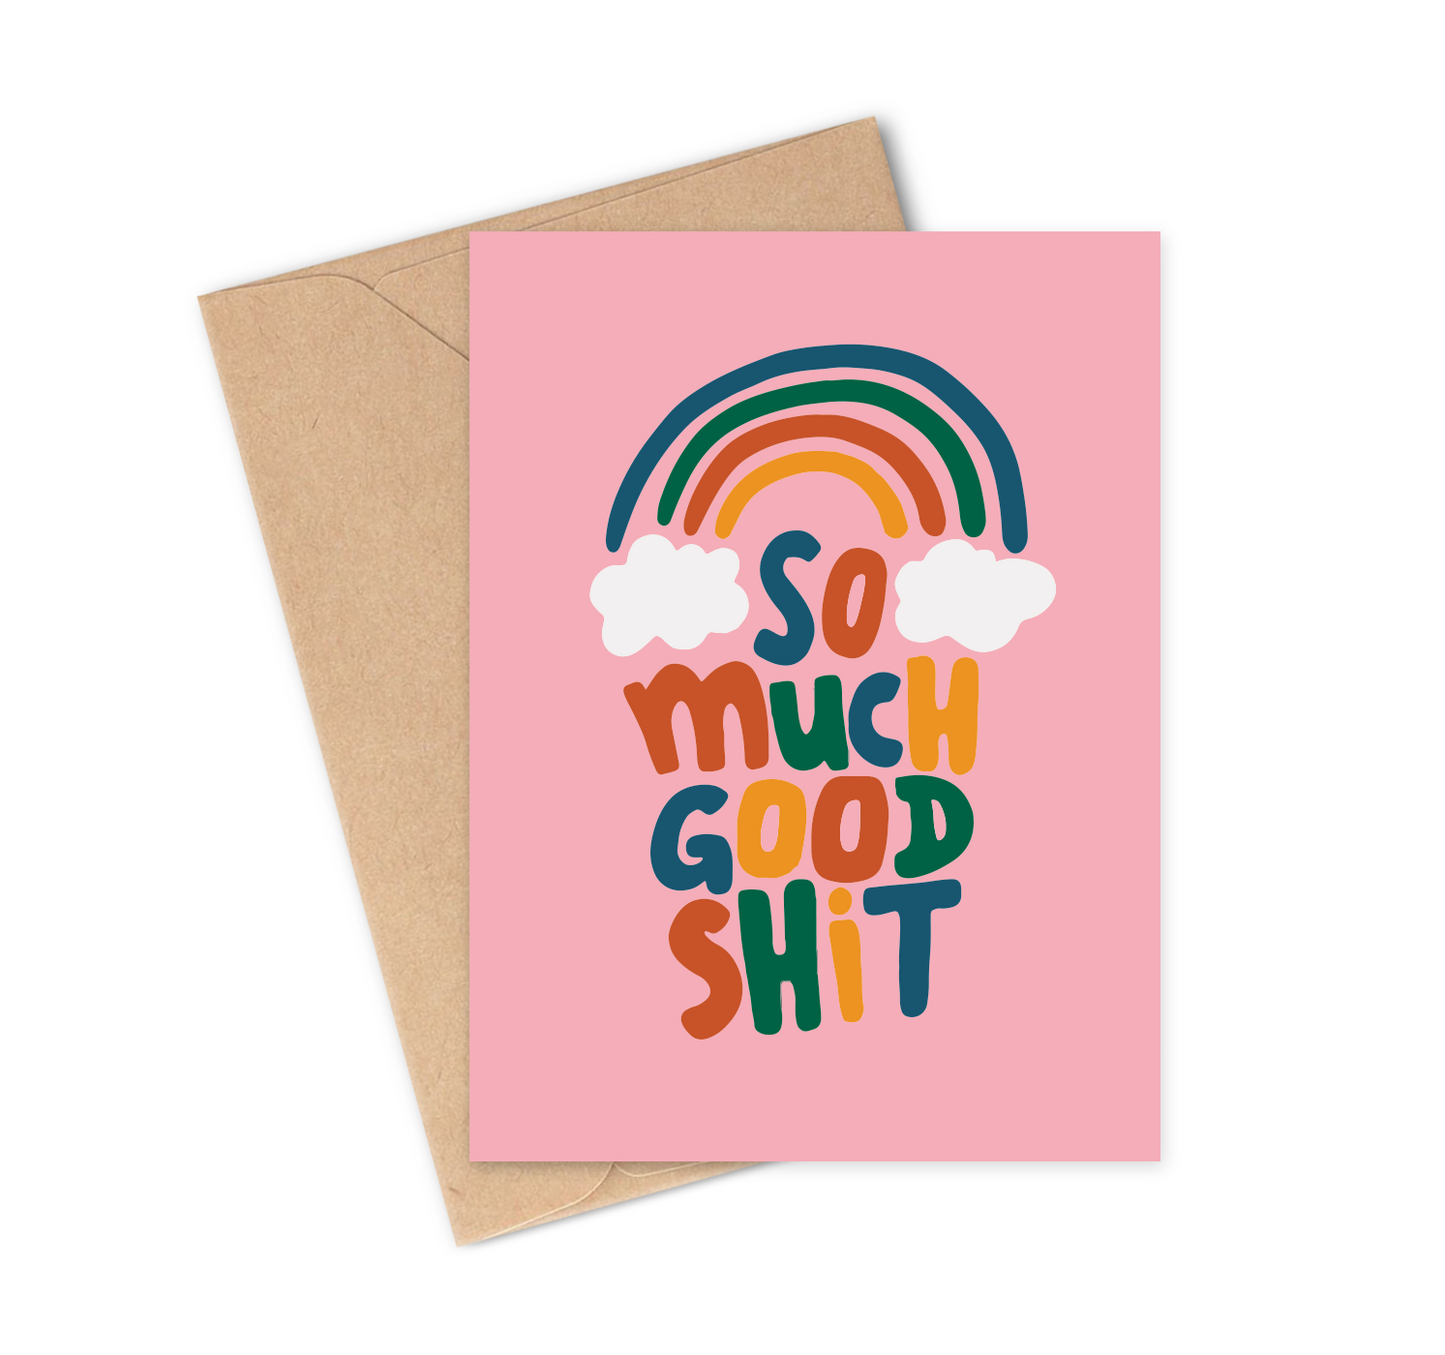 SO MUCH GOOD SHIT Greeting Card